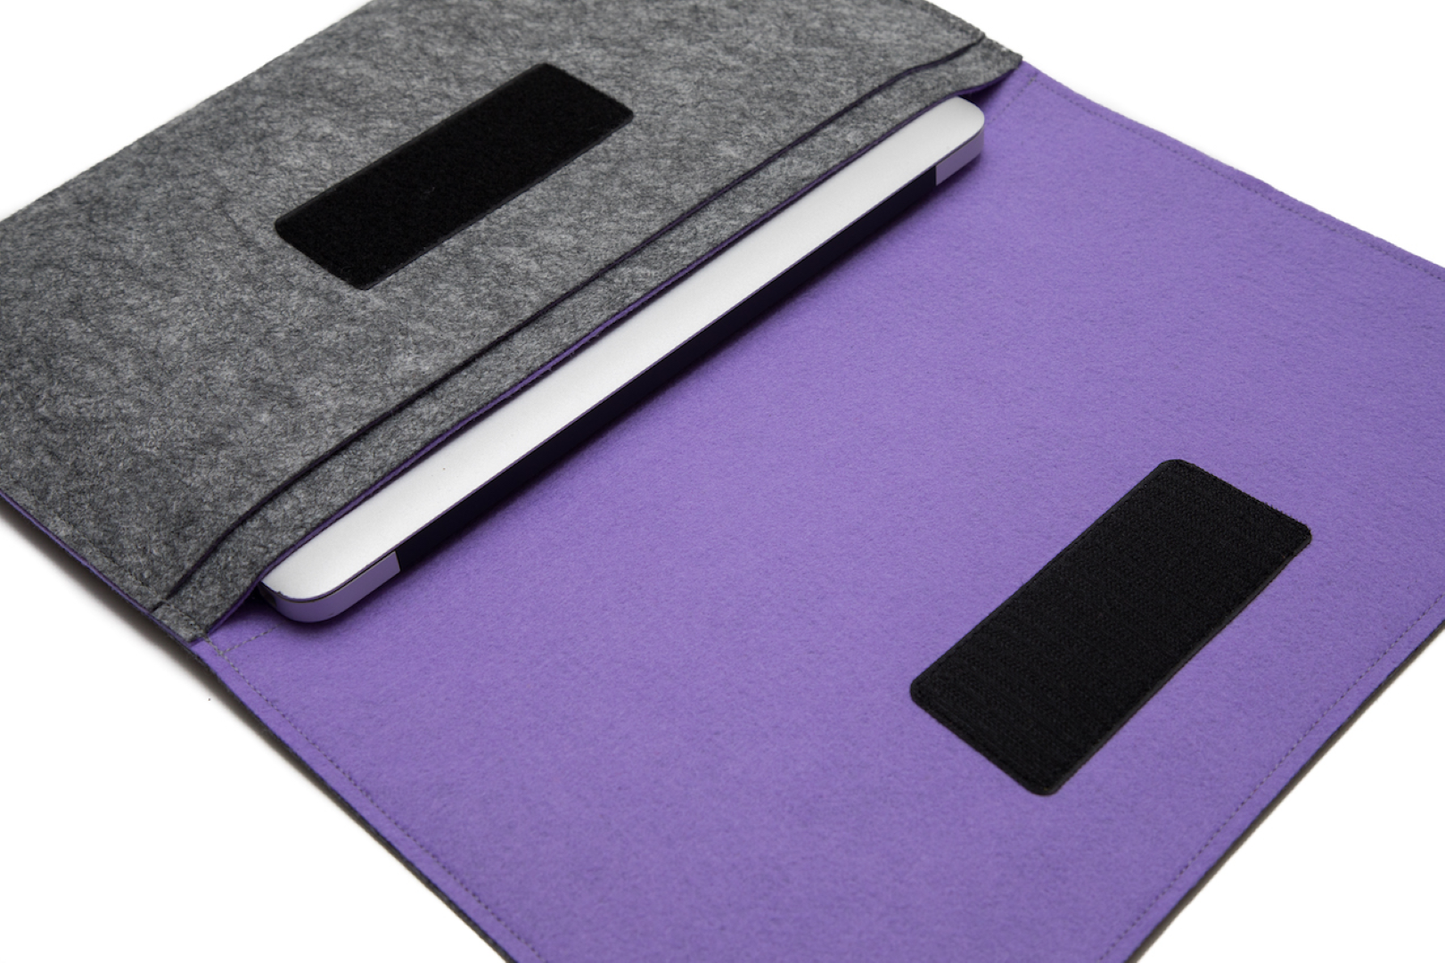 Handmade MacBook Cover with Accessories Pocket: Grey & Purple